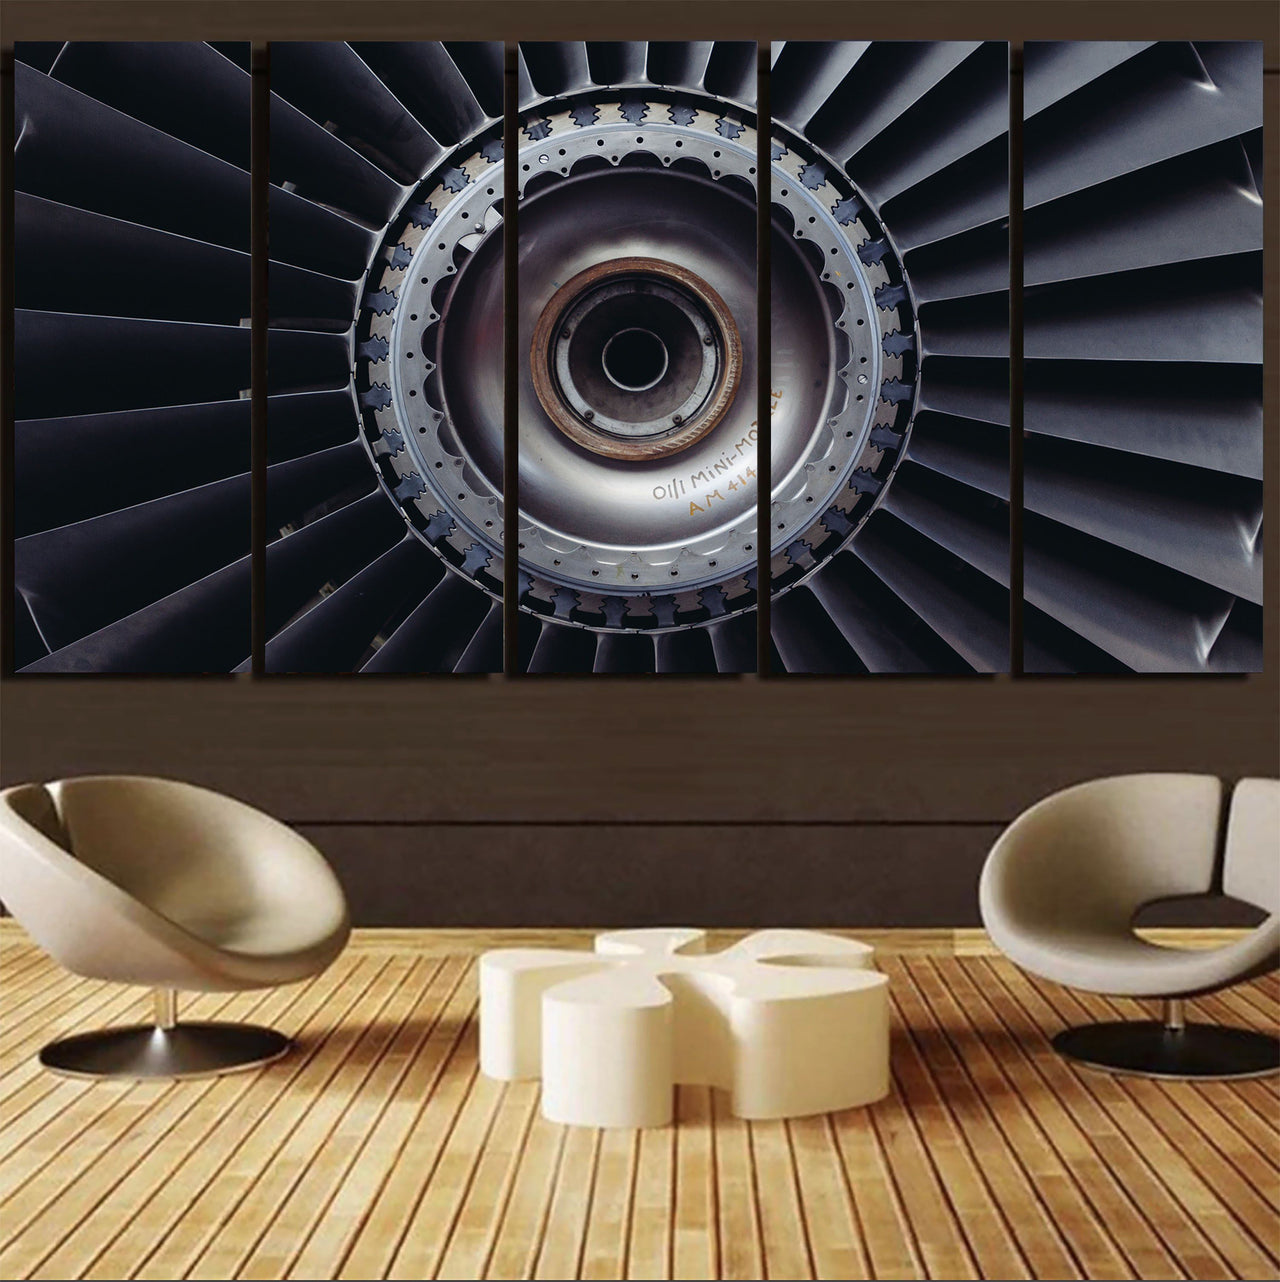 Real Jet Engine Printed Canvas Prints (5 Pieces) Aviation Shop 